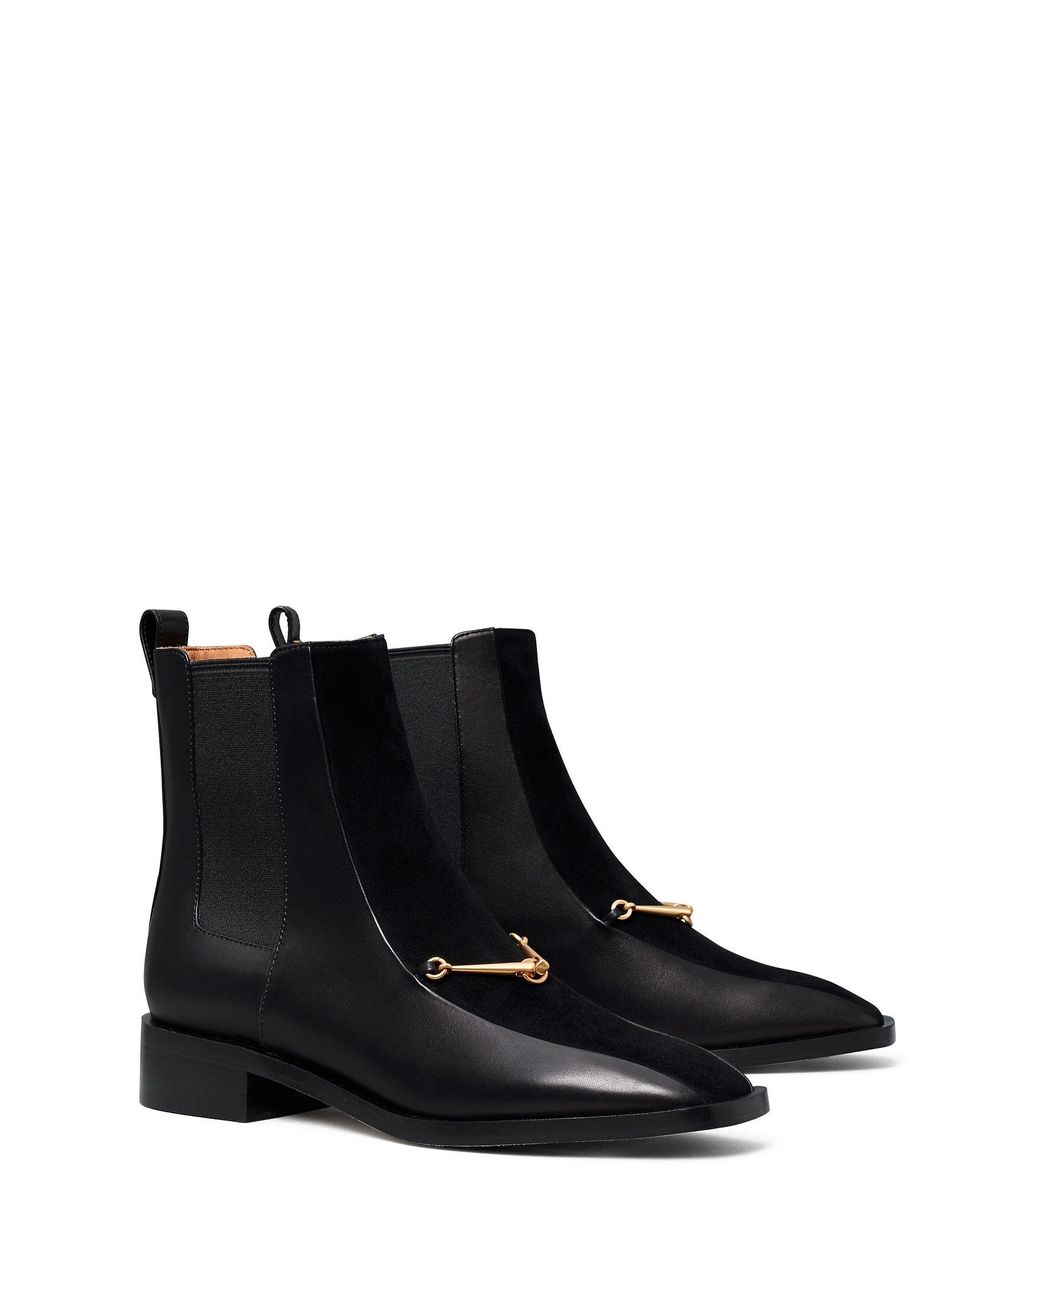 Tory Burch Equestrian Link Chelsea Boot in Black | Lyst